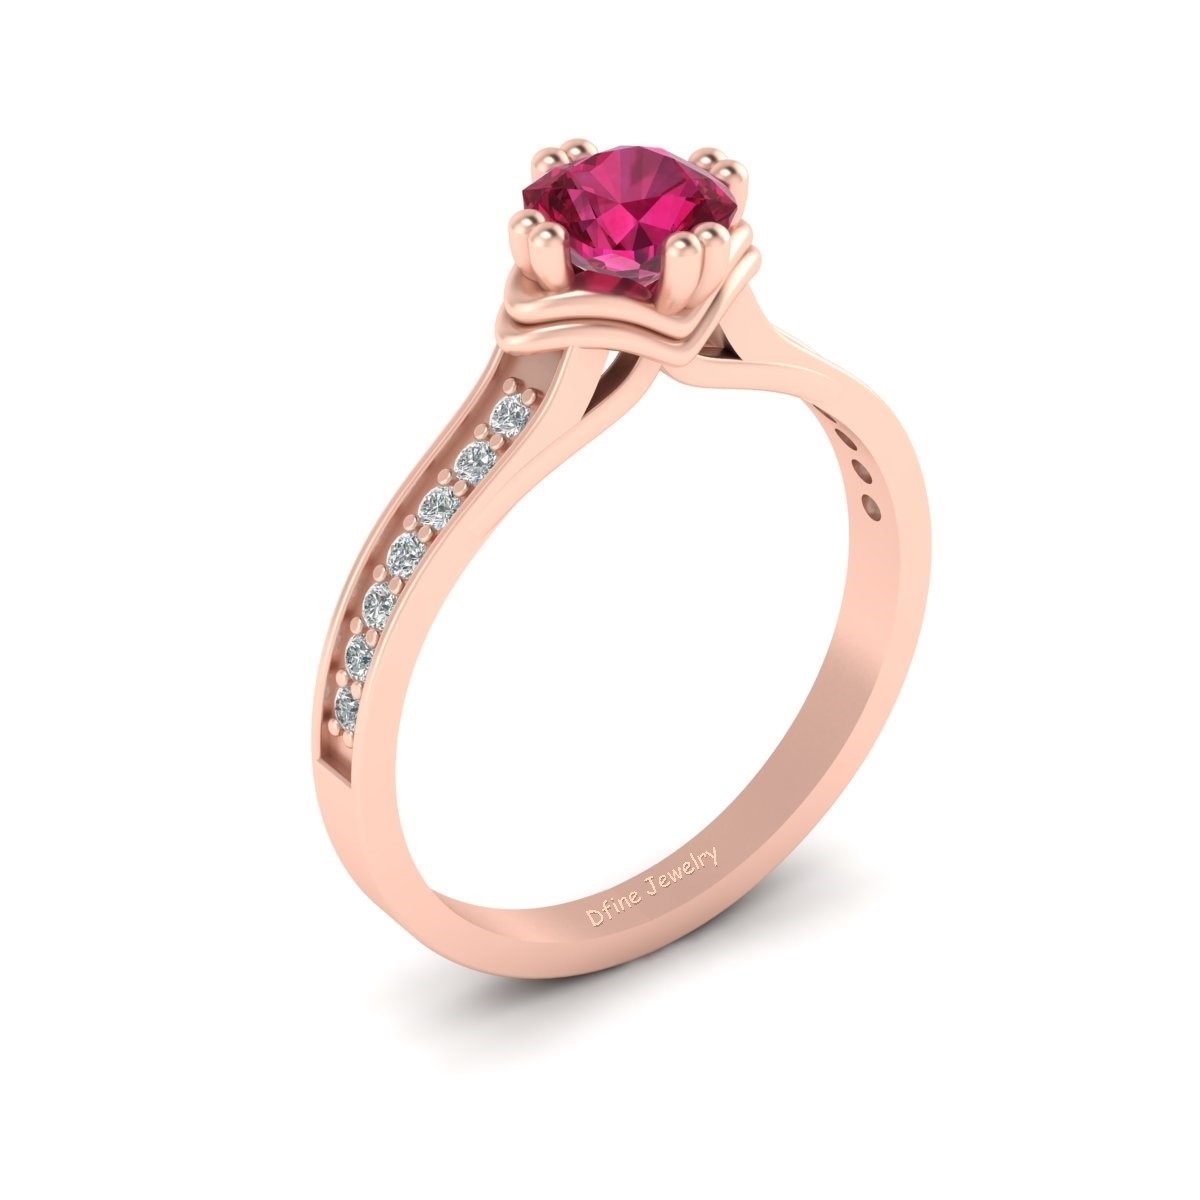 Cushion Cut Pink Ruby Engagement Ring Womens Rose Gold Bridal Wedding Jewelry